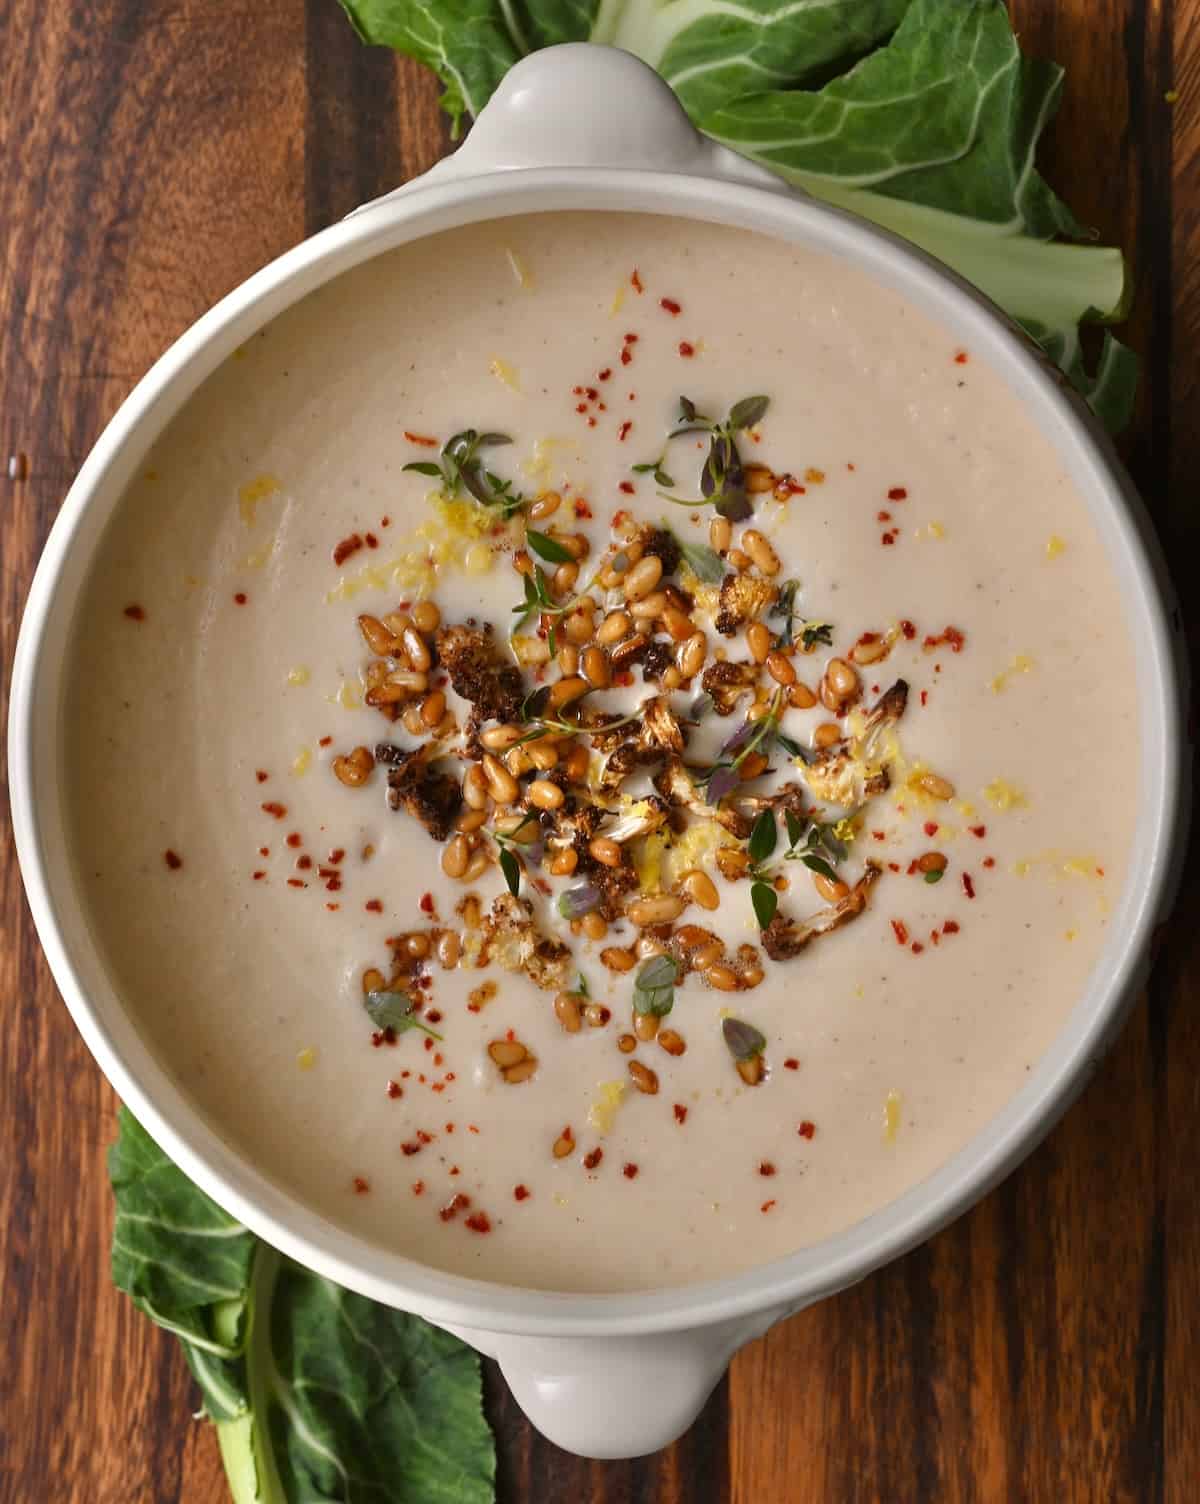 A bowl of homemade cauliflower soup topped with toasted pine nuts and lemon zest